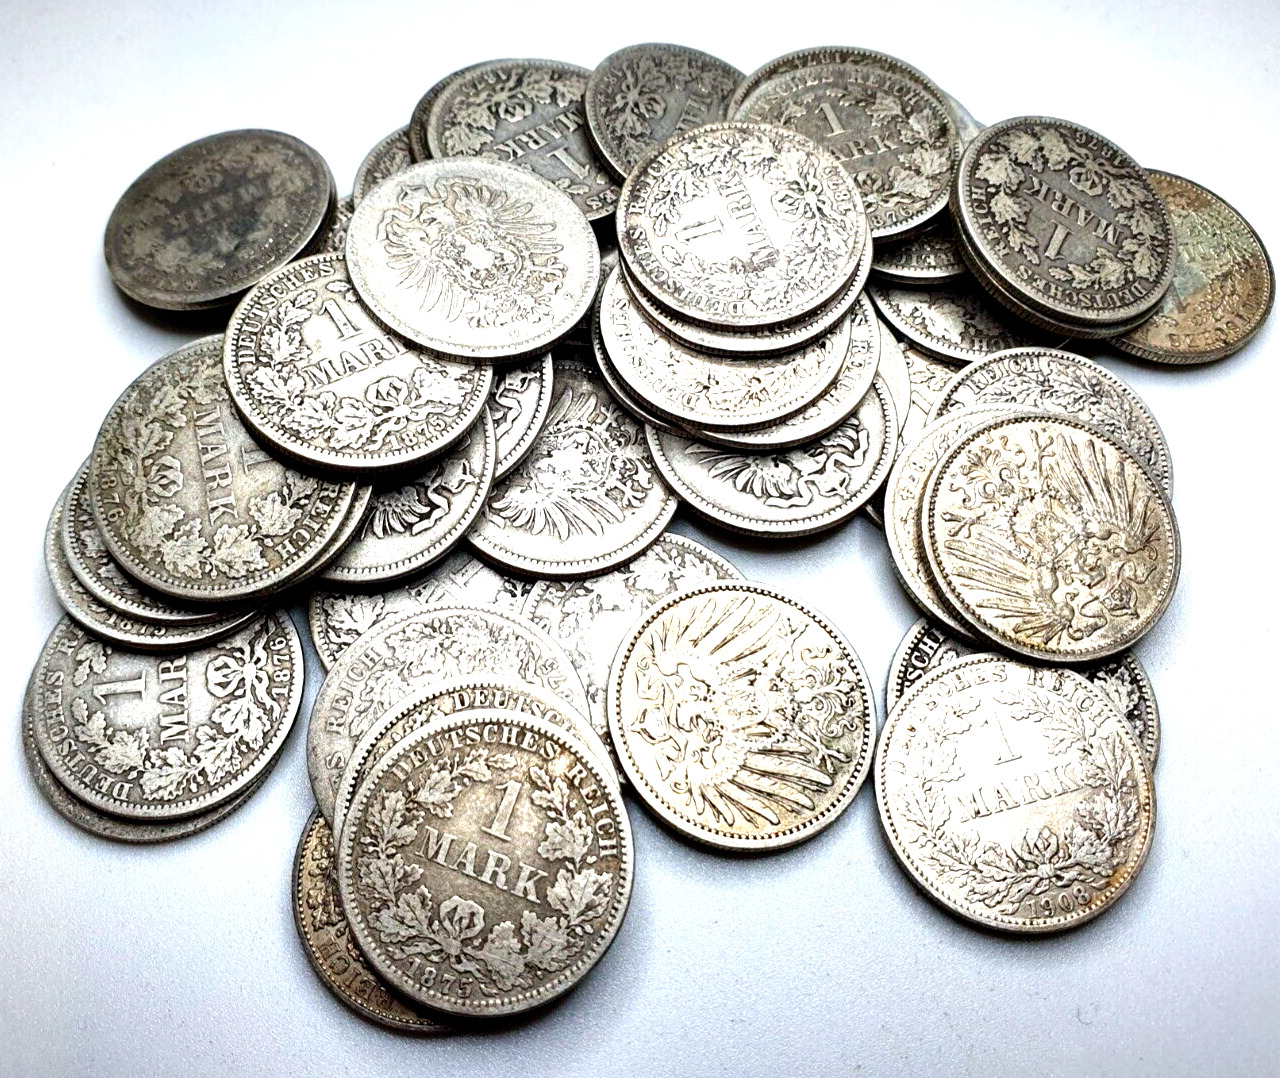 Germany - Empire 1 Mark Lot of 1 Random Old 1873-1916 Silver Ag coin Investment